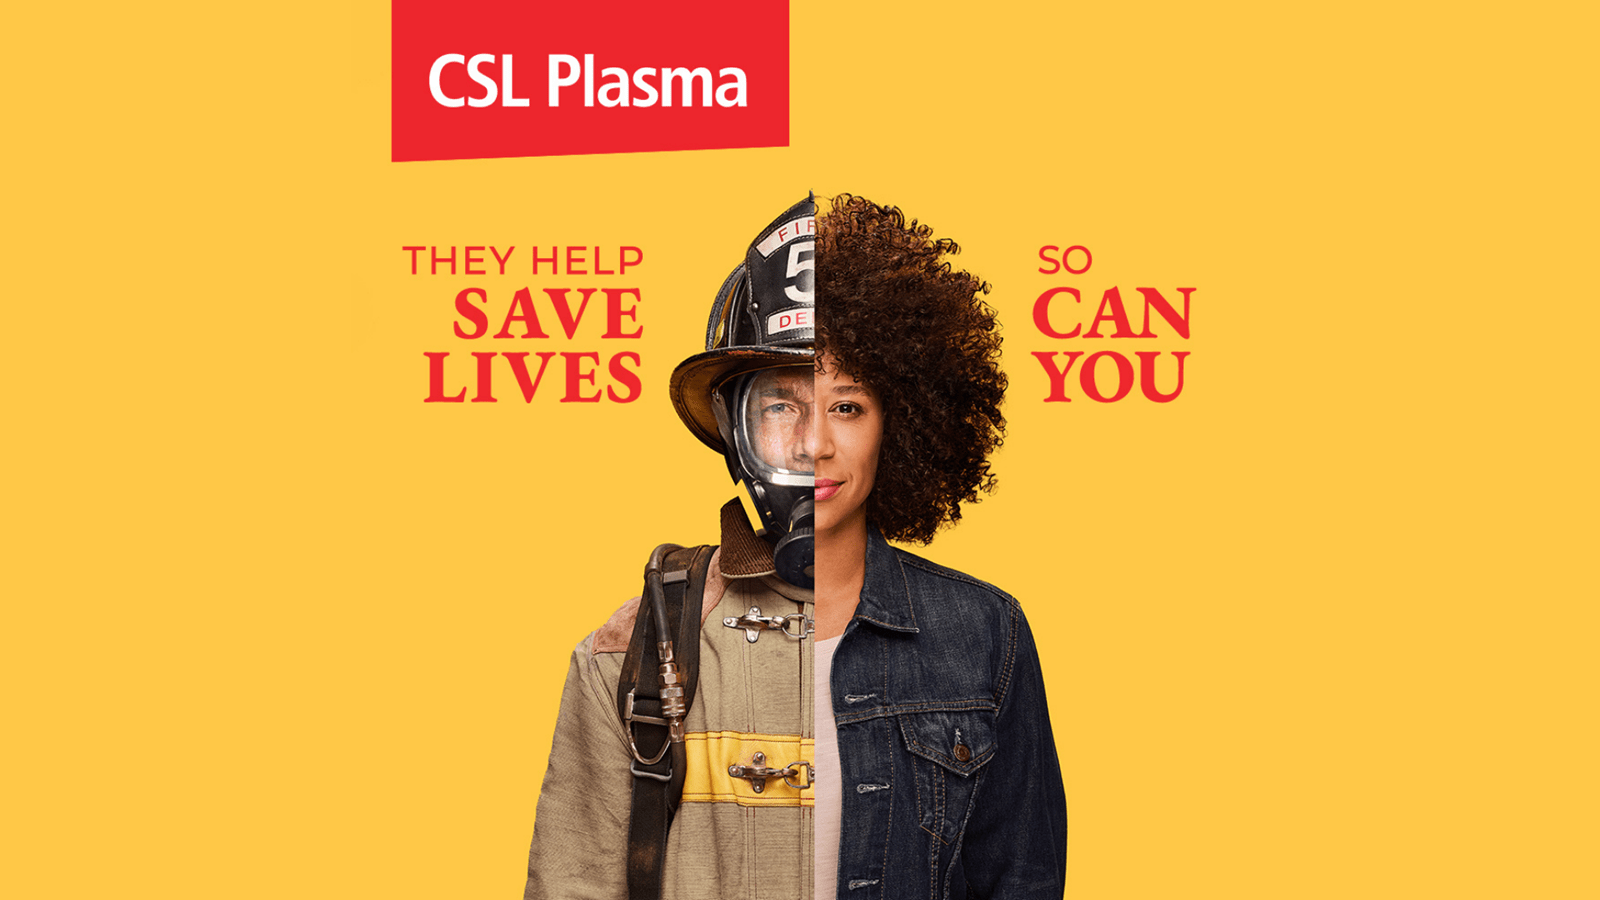 CSL Plasma image of a woman in plain clothes and a firefighter. Text says "They help save lives. So can you."